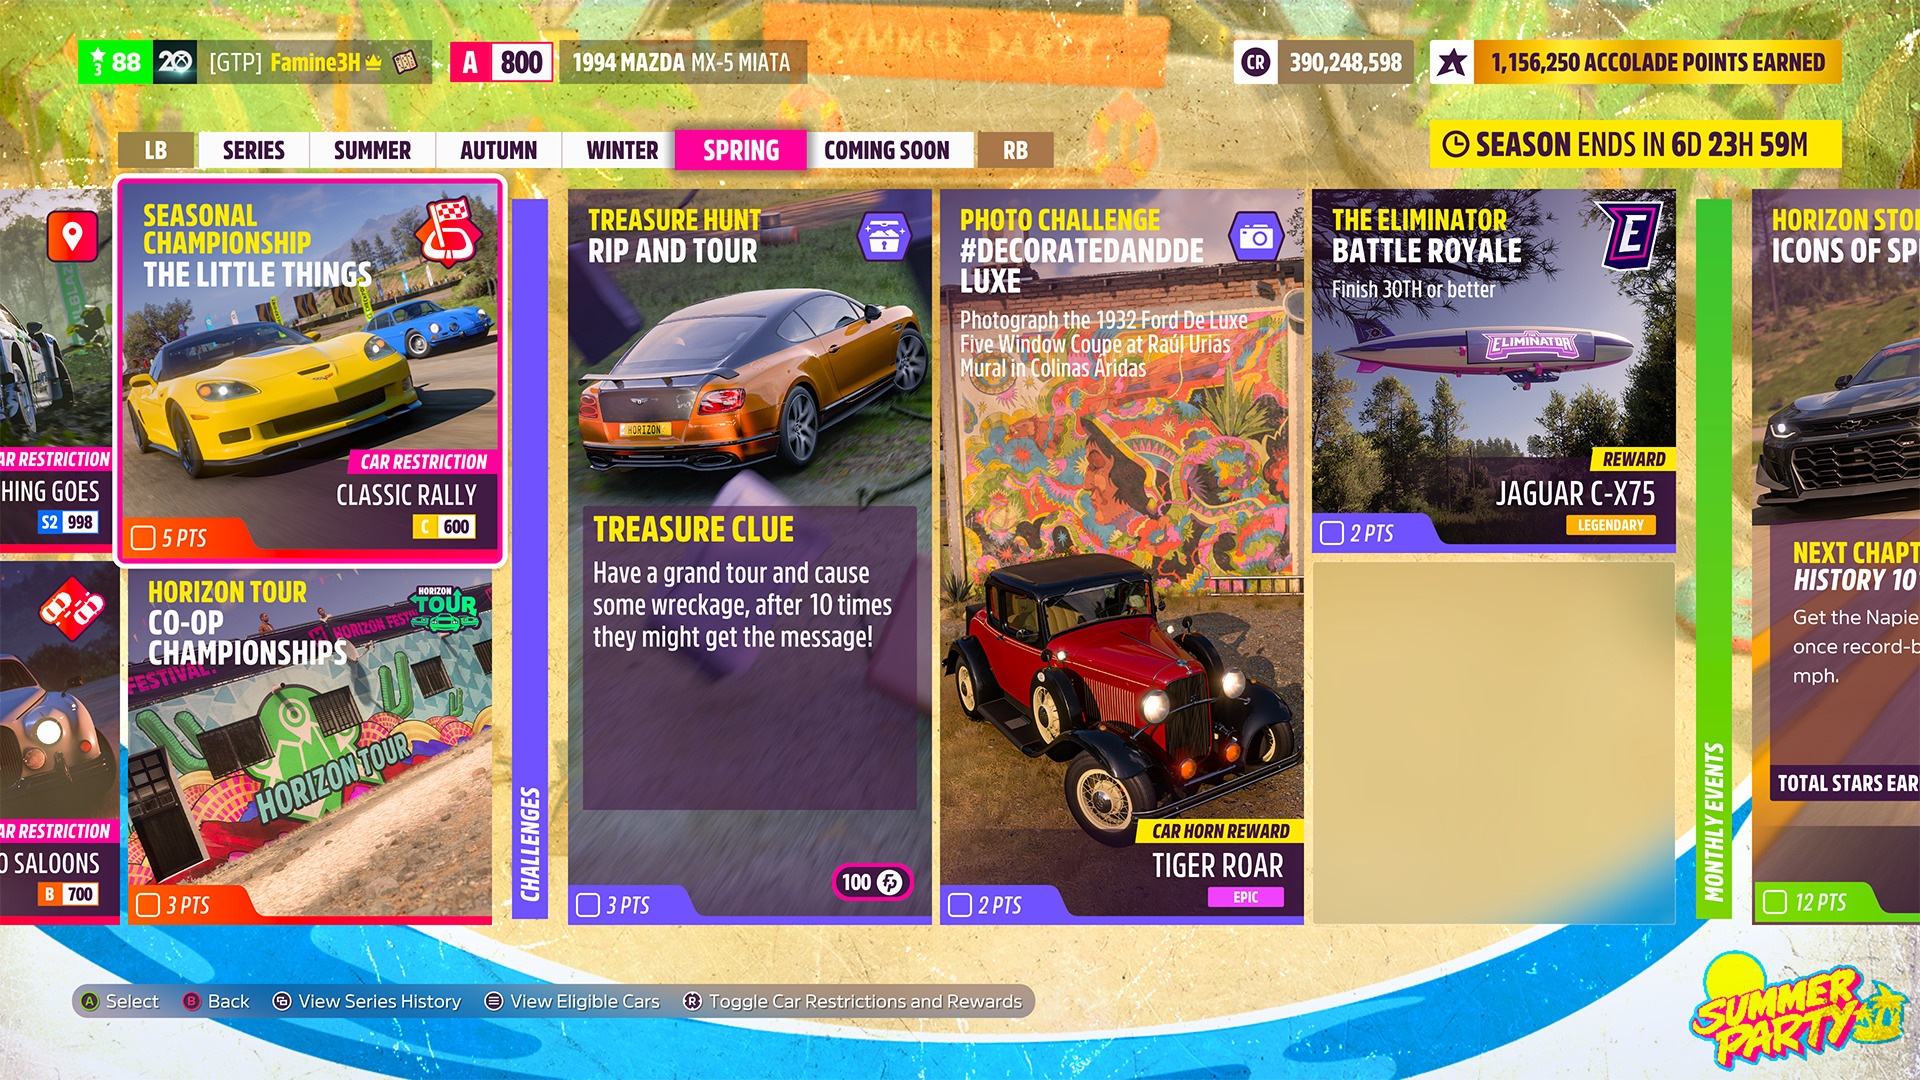 Forza Horizon on X: The Lunar New Year is here! 🎇 Celebrate with new  cars, horns and Trailblazers as lanterns dress the streets of Guanajuato.  #ForzaHorizon5 Series 3 begins this week and